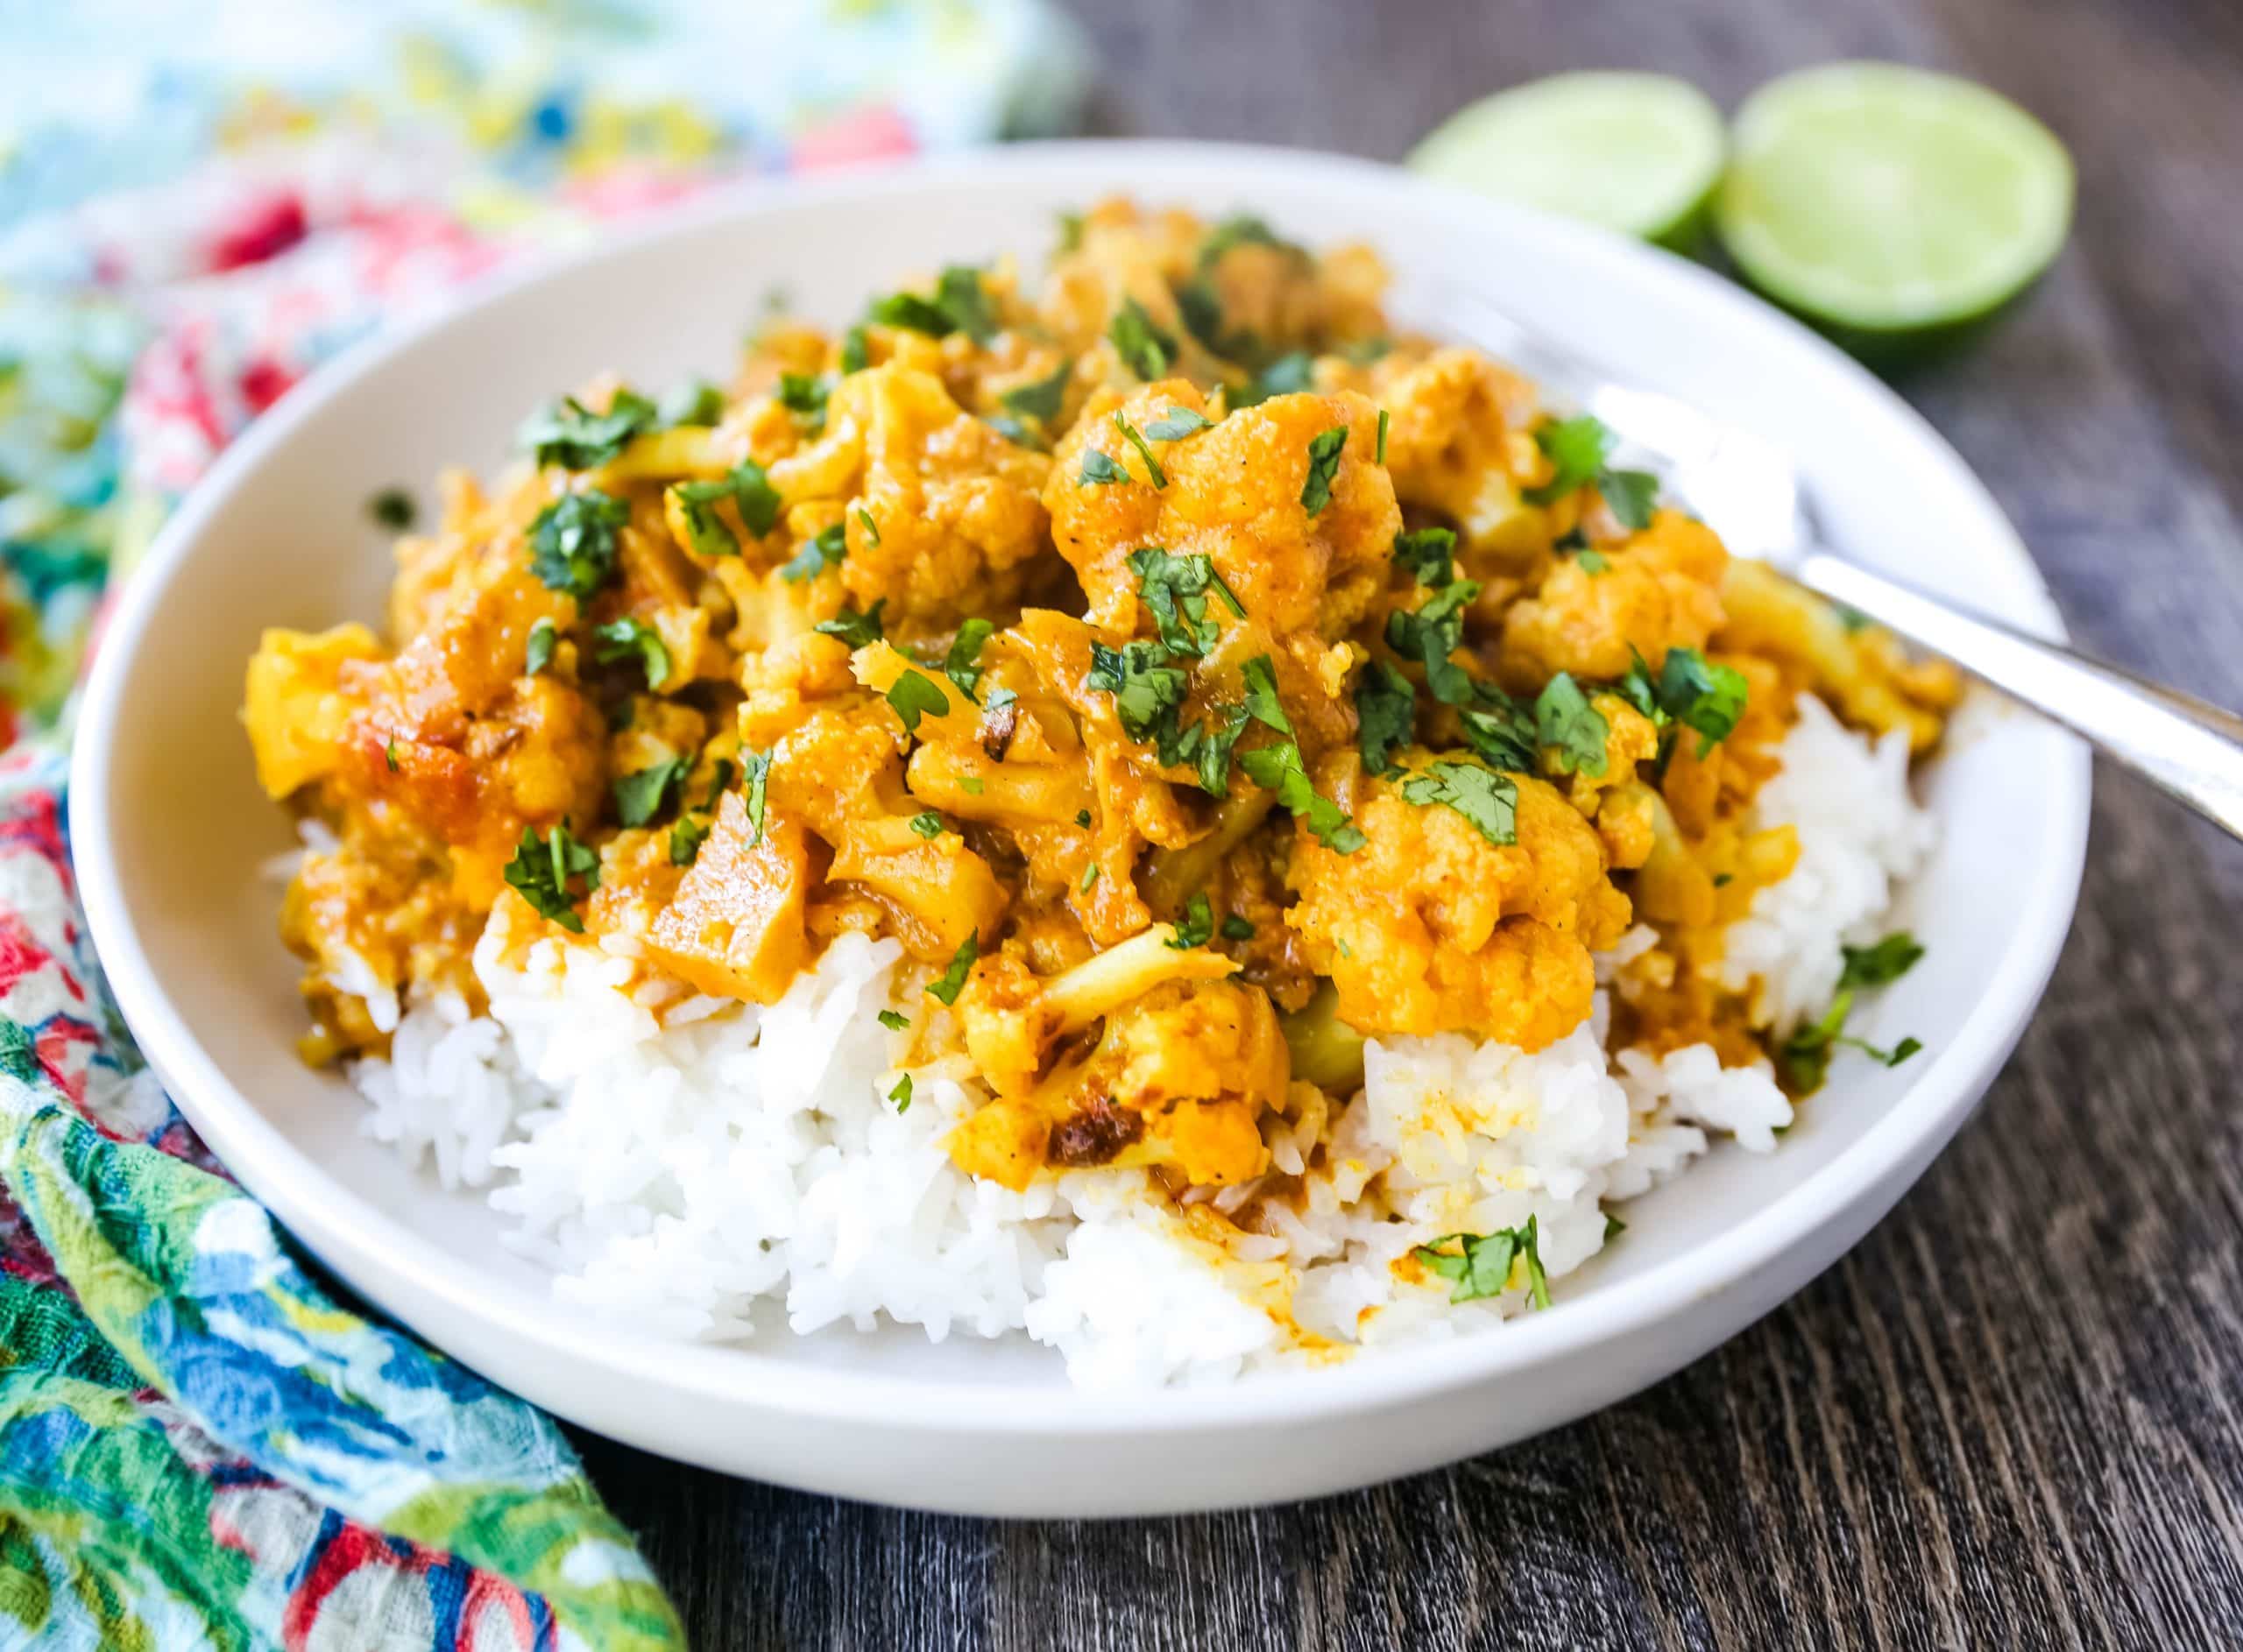 Coconut Cauliflower Curry A rich coconut curry broth with onion, garlic, cauliflower, ginger, Indian spices in coconut milk. Flavorful vegan meal and you won’t even miss the meat! www.modernhoney.com #curry #cauliflower #cauliflowercurry #indianfood 